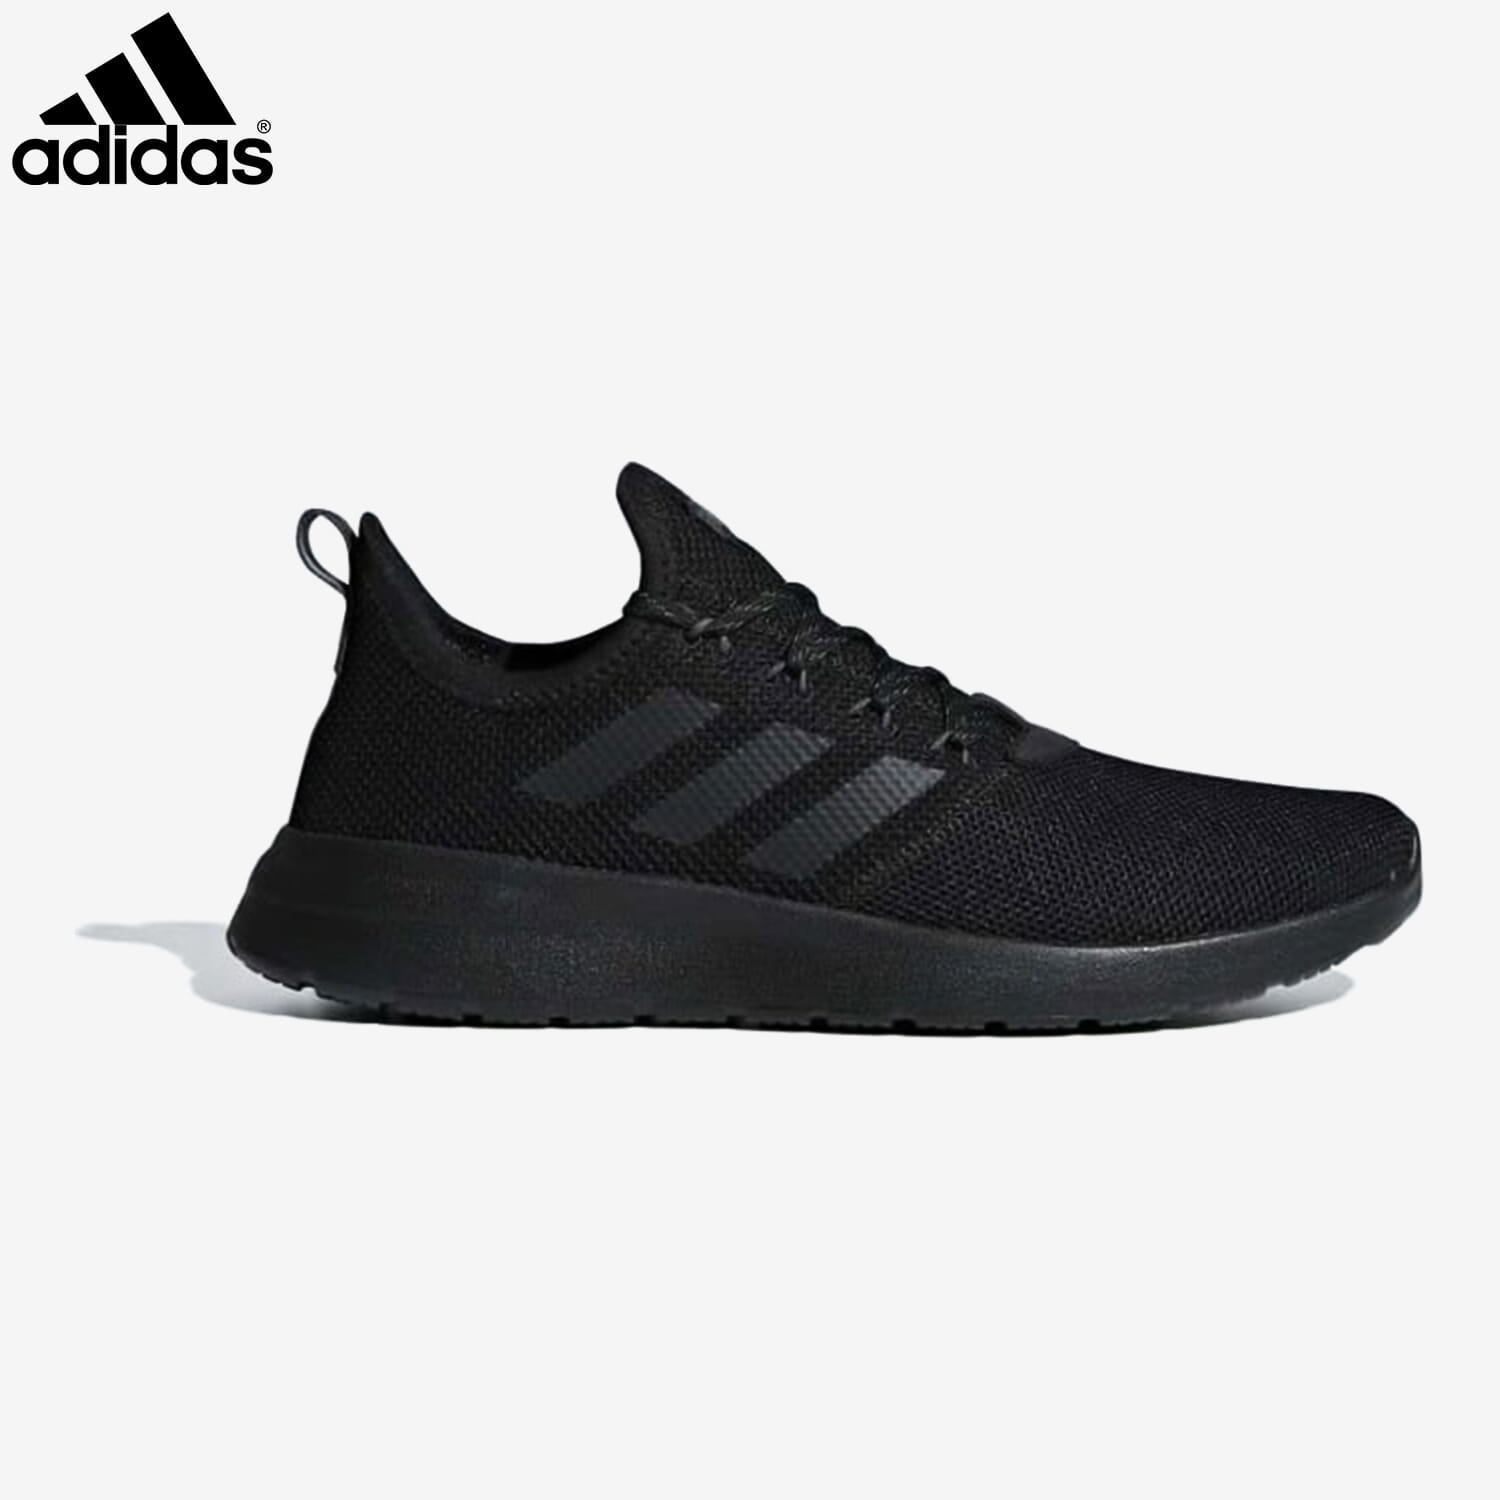 Adidas Black Lite Racer RBN Running Shoes For Men F36642: Buy Online at Best Prices in Nepal Daraz.com.np